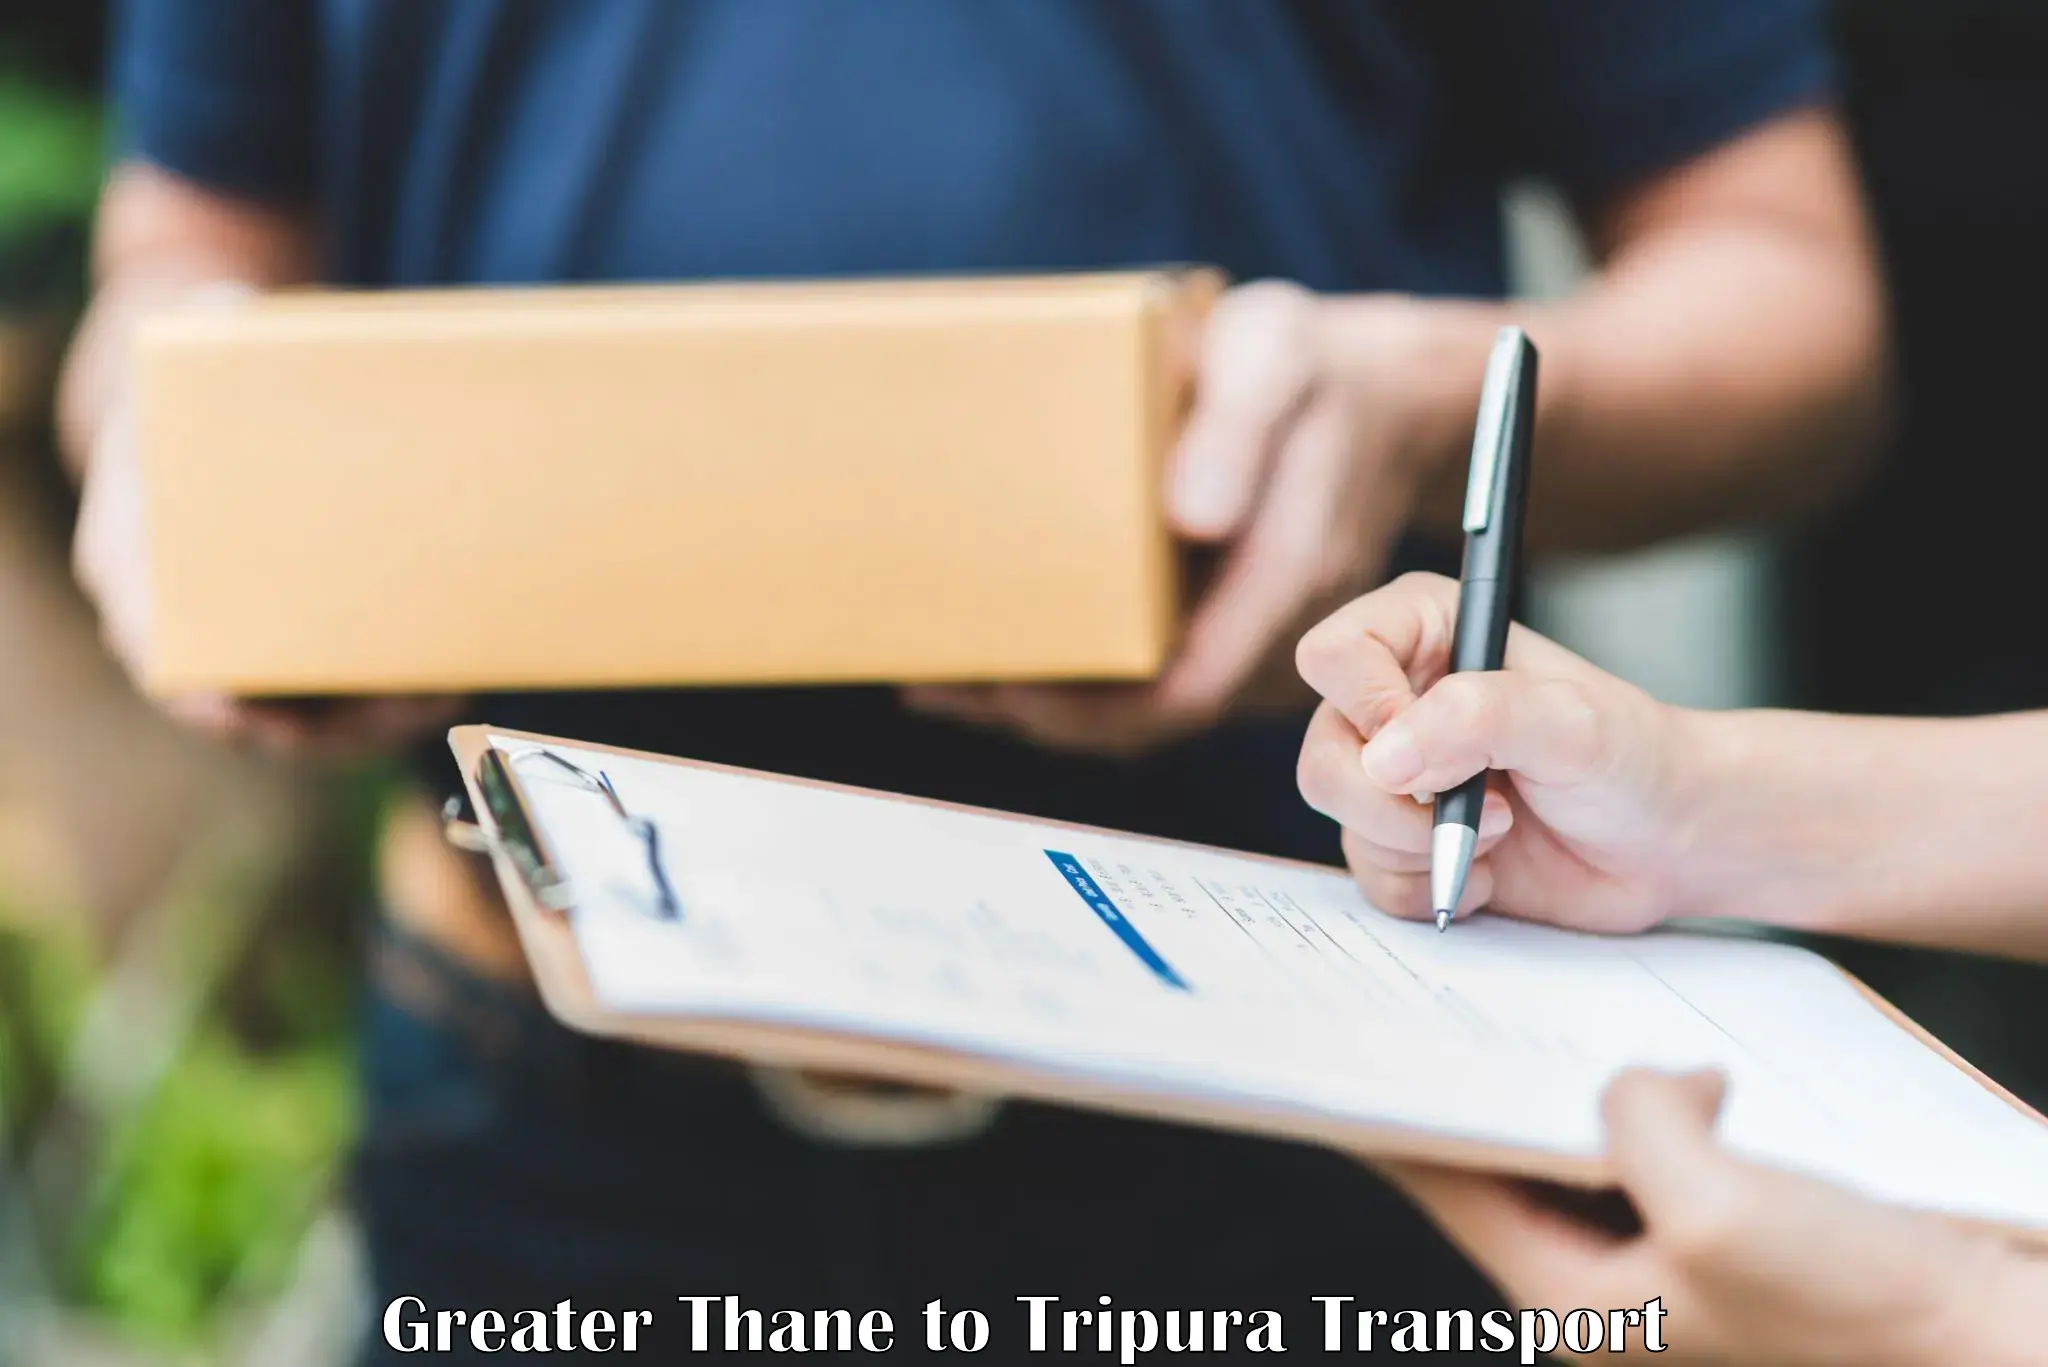 Online transport service Greater Thane to Tripura